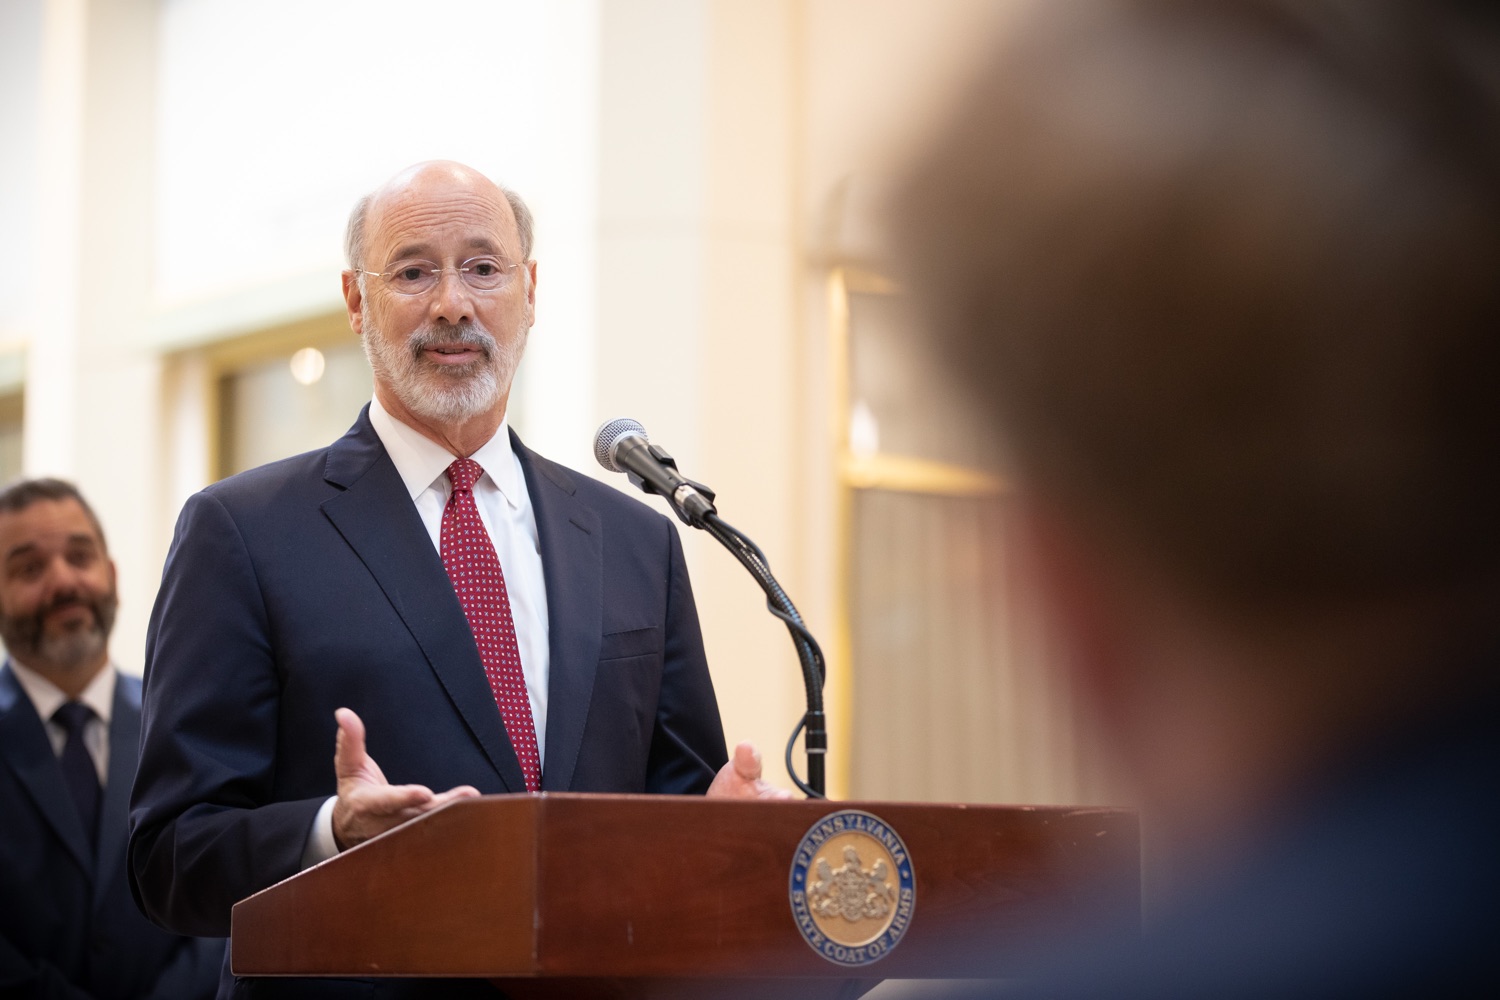 Pennsylvania Governor Tom Wolf answers a question from a student reporter.  Celebrating the success of the PAsmart workforce development program to create educational opportunities at schools across the commonwealth, Governor Tom Wolf welcomed more than 50 students from the Pennsylvania Rural Robotics Initiative to the Capitol today. The students from nine western Pennsylvania school districts showcased their skills in coding, robotics and drone technology. The Wolf administration awarded the initiative a $299,000 PAsmart Advancing Grant earlier this year. Harrisburg, PA  Tuesday, November 12, 2019<br><a href="https://filesource.amperwave.net/commonwealthofpa/photo/17587_gov_pasmart_rural_robotics_dz_019.jpg" target="_blank">⇣ Download Photo</a>